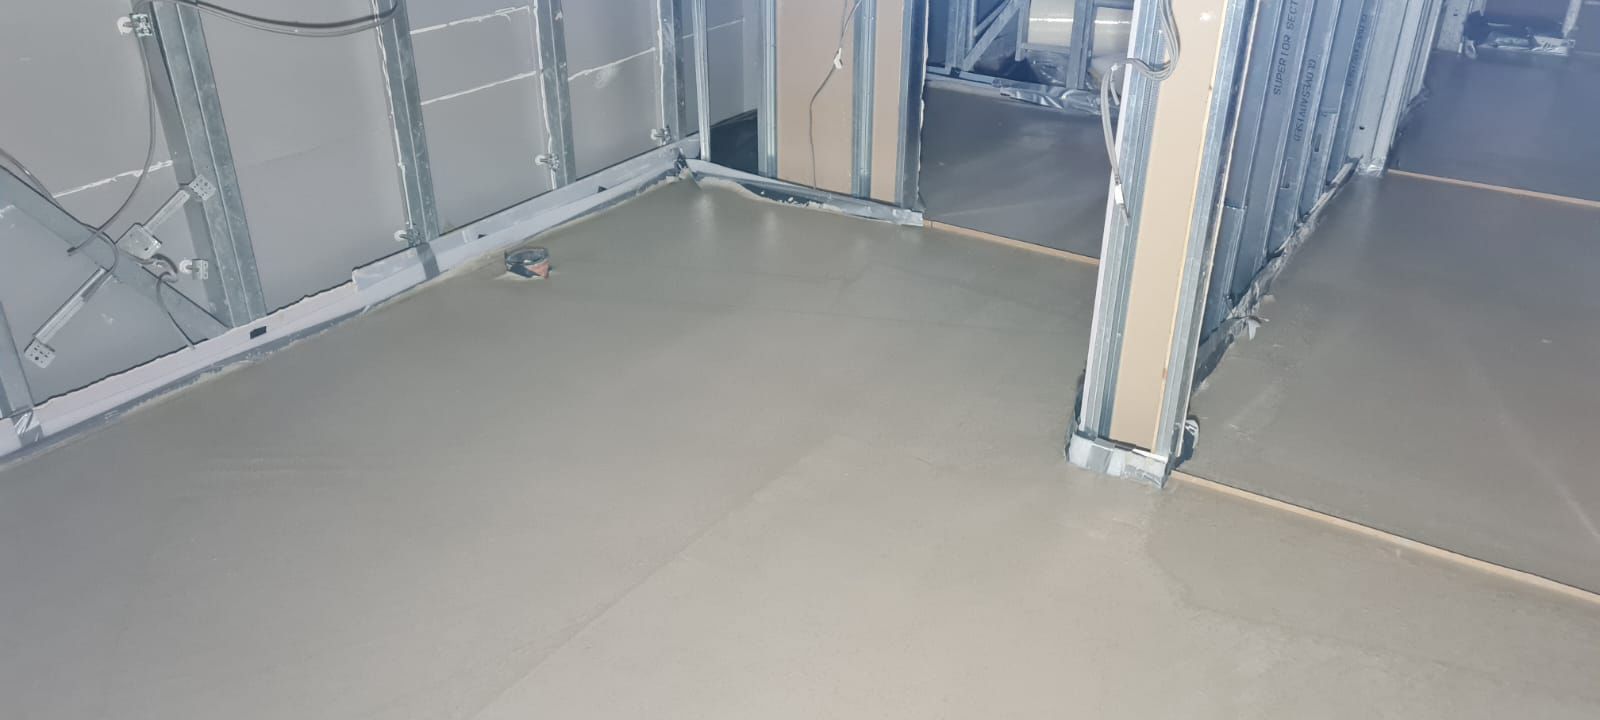 Floor Screeding for Park View Apartments, Chorley